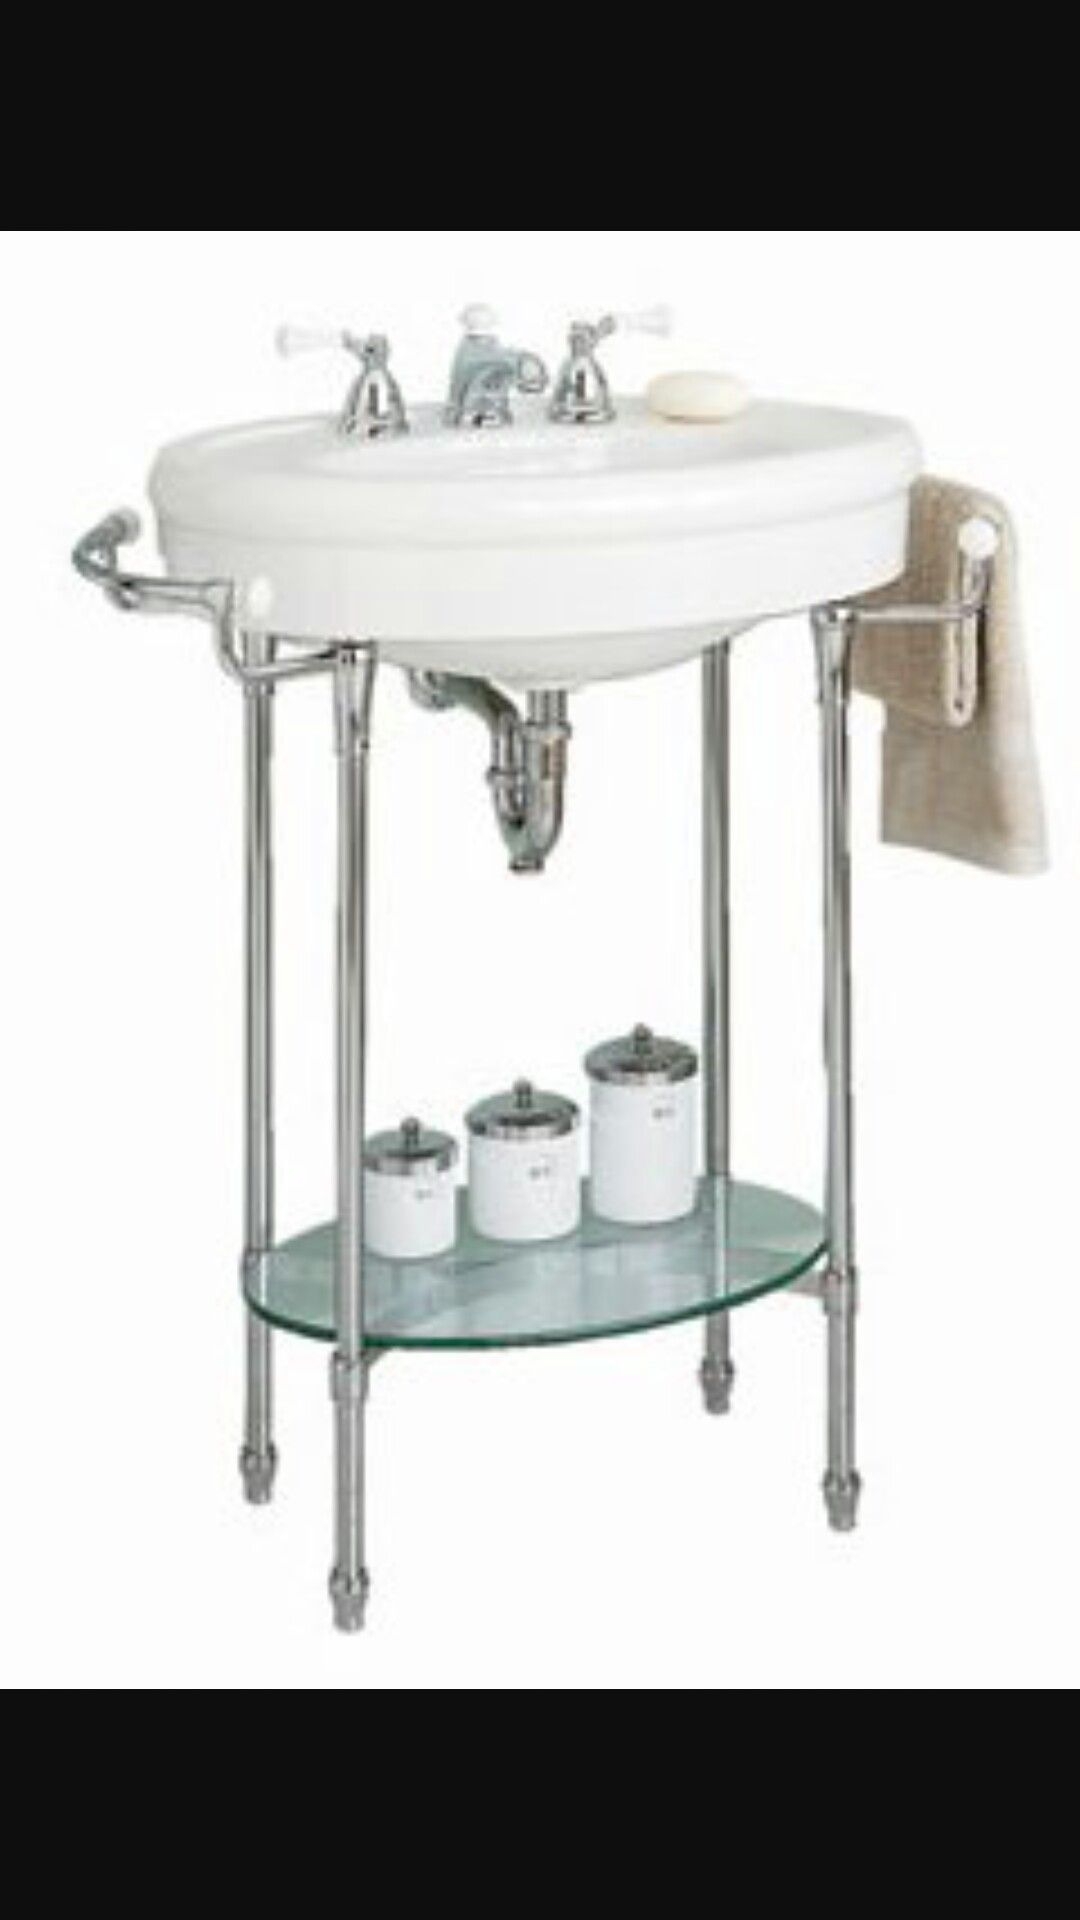 American Standard Standard Console Sink With Chrome Legs Traditional Bathroom Sinks